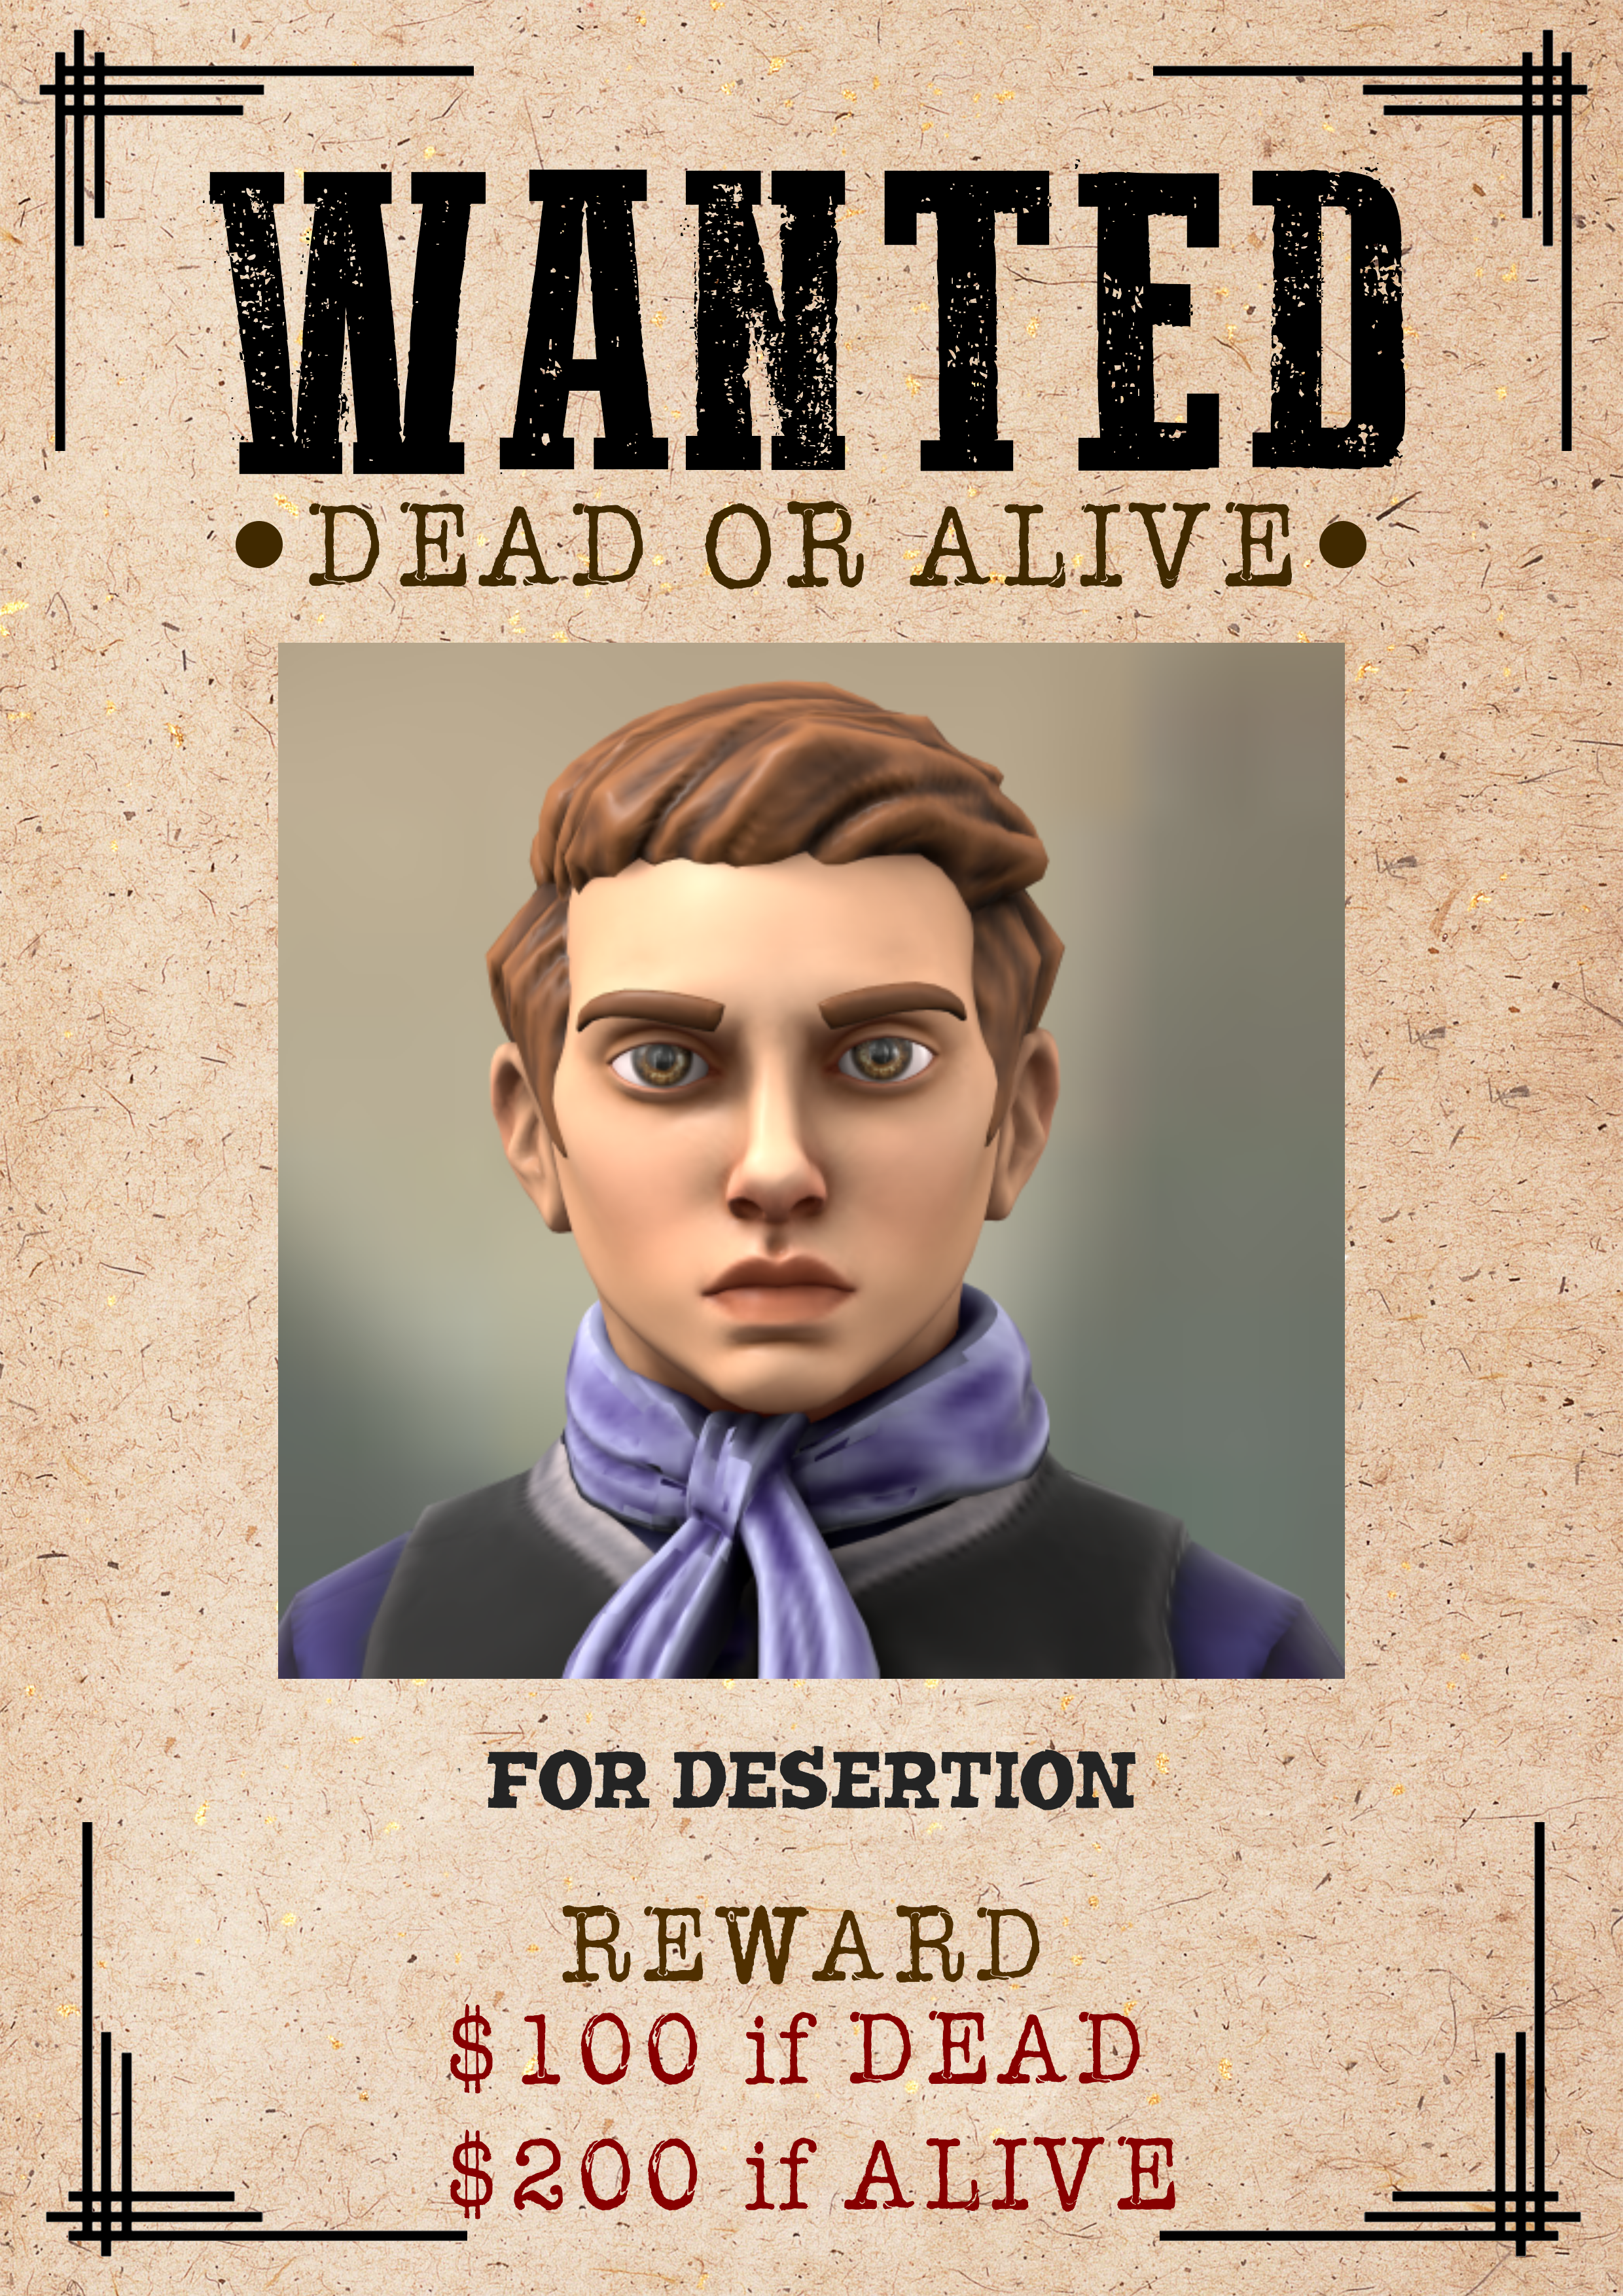 A Wanted poster of Matt, dead or alive. The crime listed is desertation. The reward is $100 if Dead, $200 if Alive. It has a close up of his face. He has hazel eyes, and reddish-brown hair.